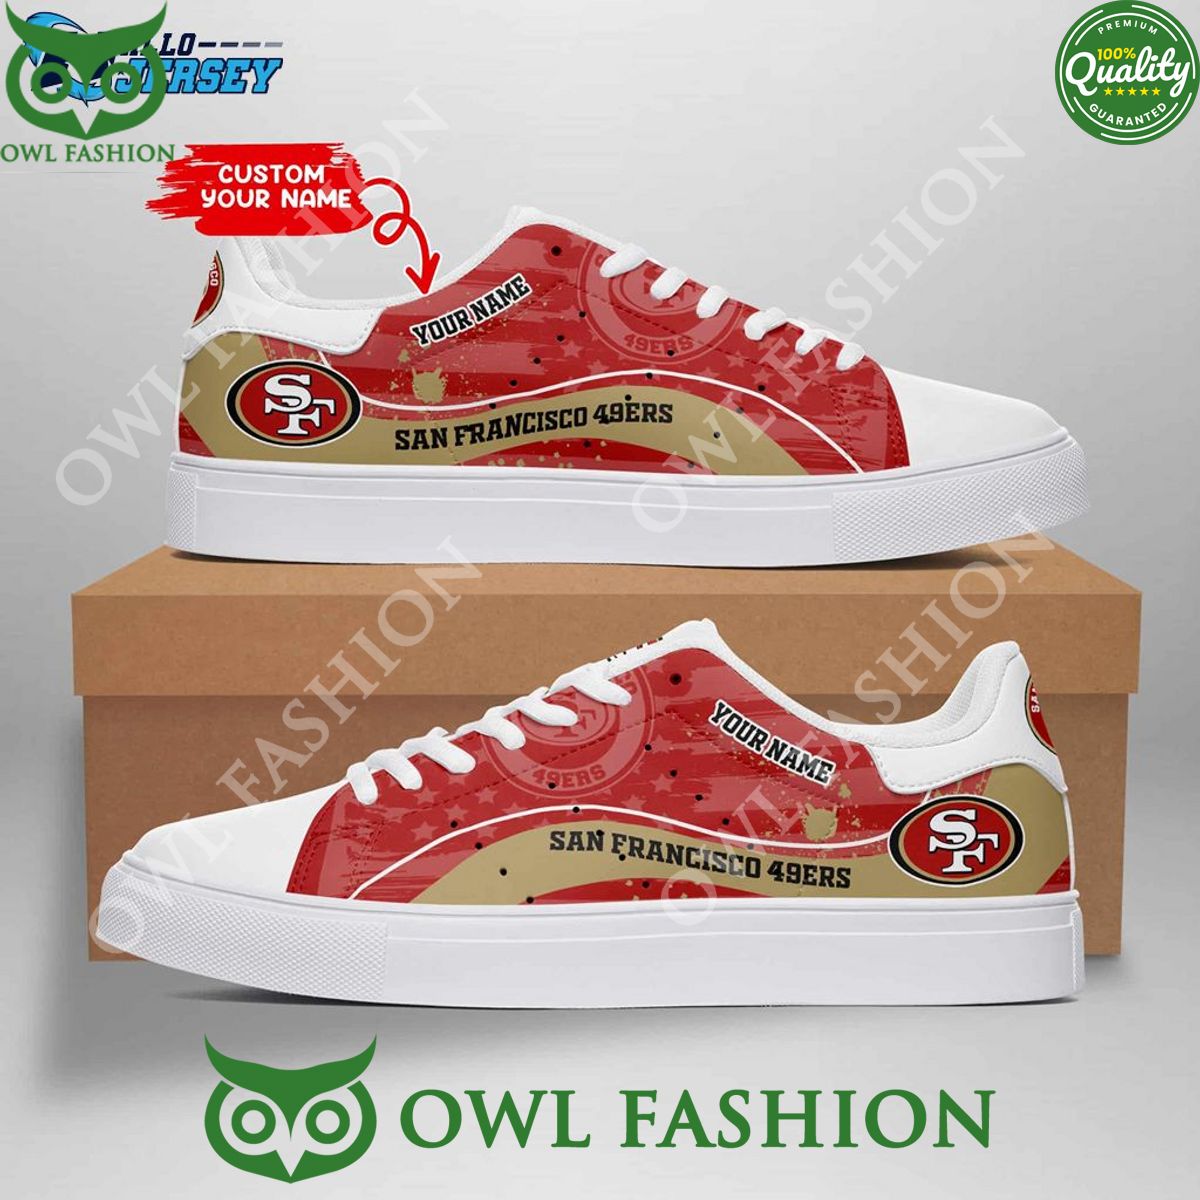 San Francisco 49ers Customized NFL Stan Smith Sneakers